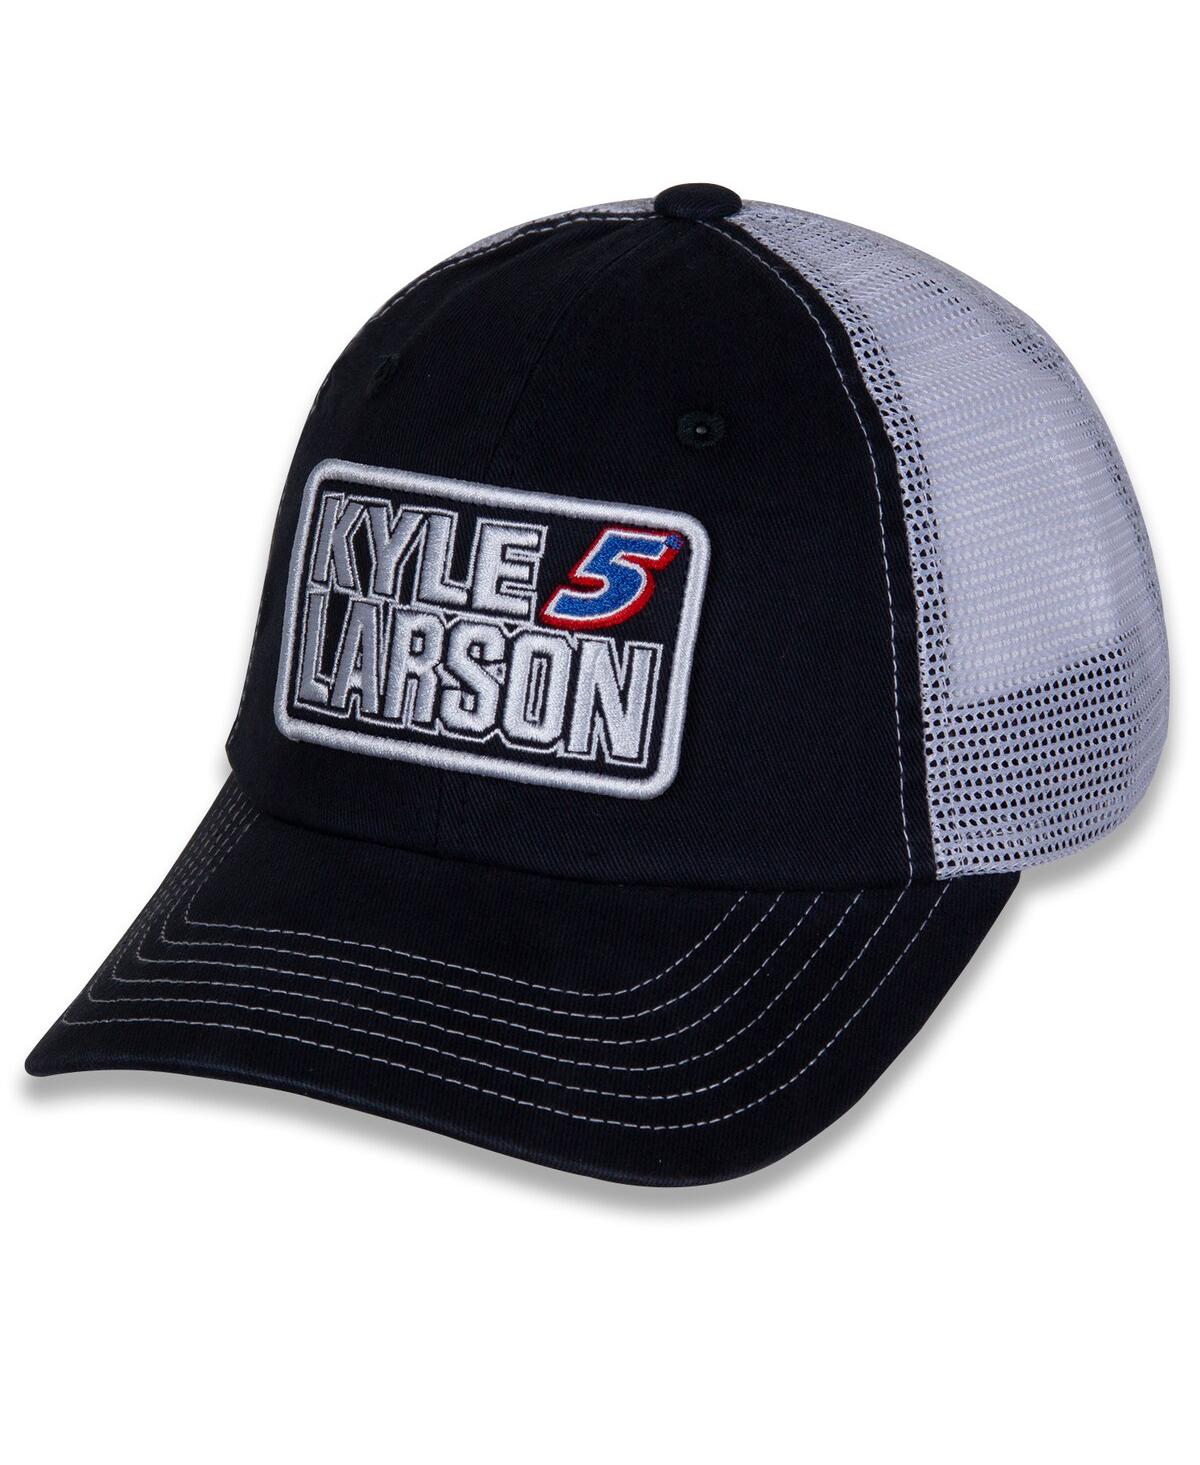 Women's Hendrick Motorsports Team Collection Black, White Kyle Larson Name and Number Patch Adjustable Hat - Black, White